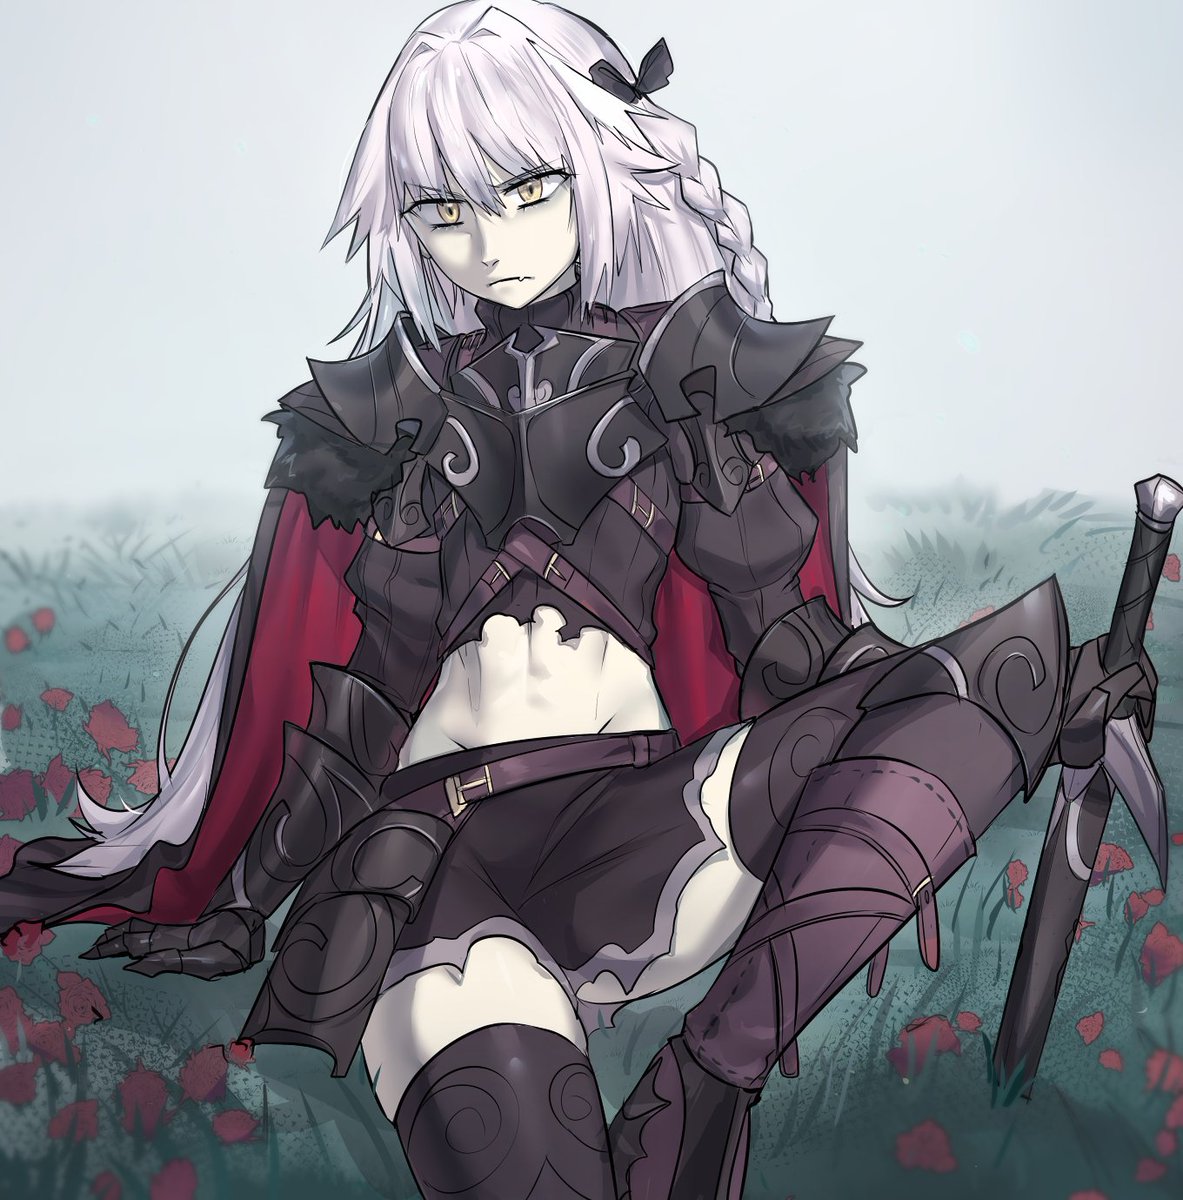 Astolfo Alter design, edge-ifying characters is a personal love of mine #FG...